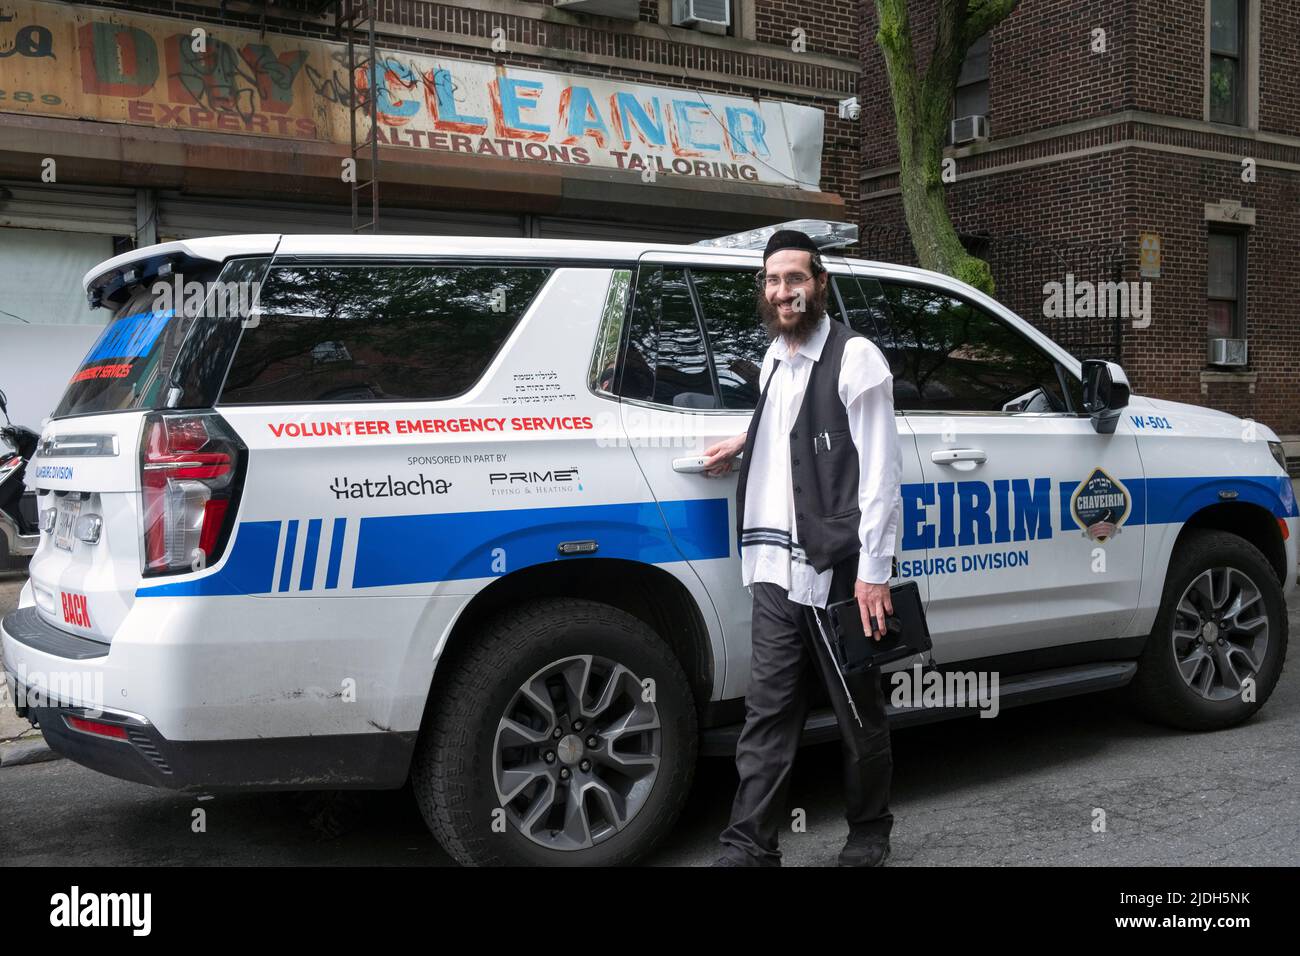 Posed portrait of a volunteer from Chaveirim (Hebrew for friends) who helps neighbors in need like lockouts, flats, battery boosts, etc. In Brooklyn. Stock Photo